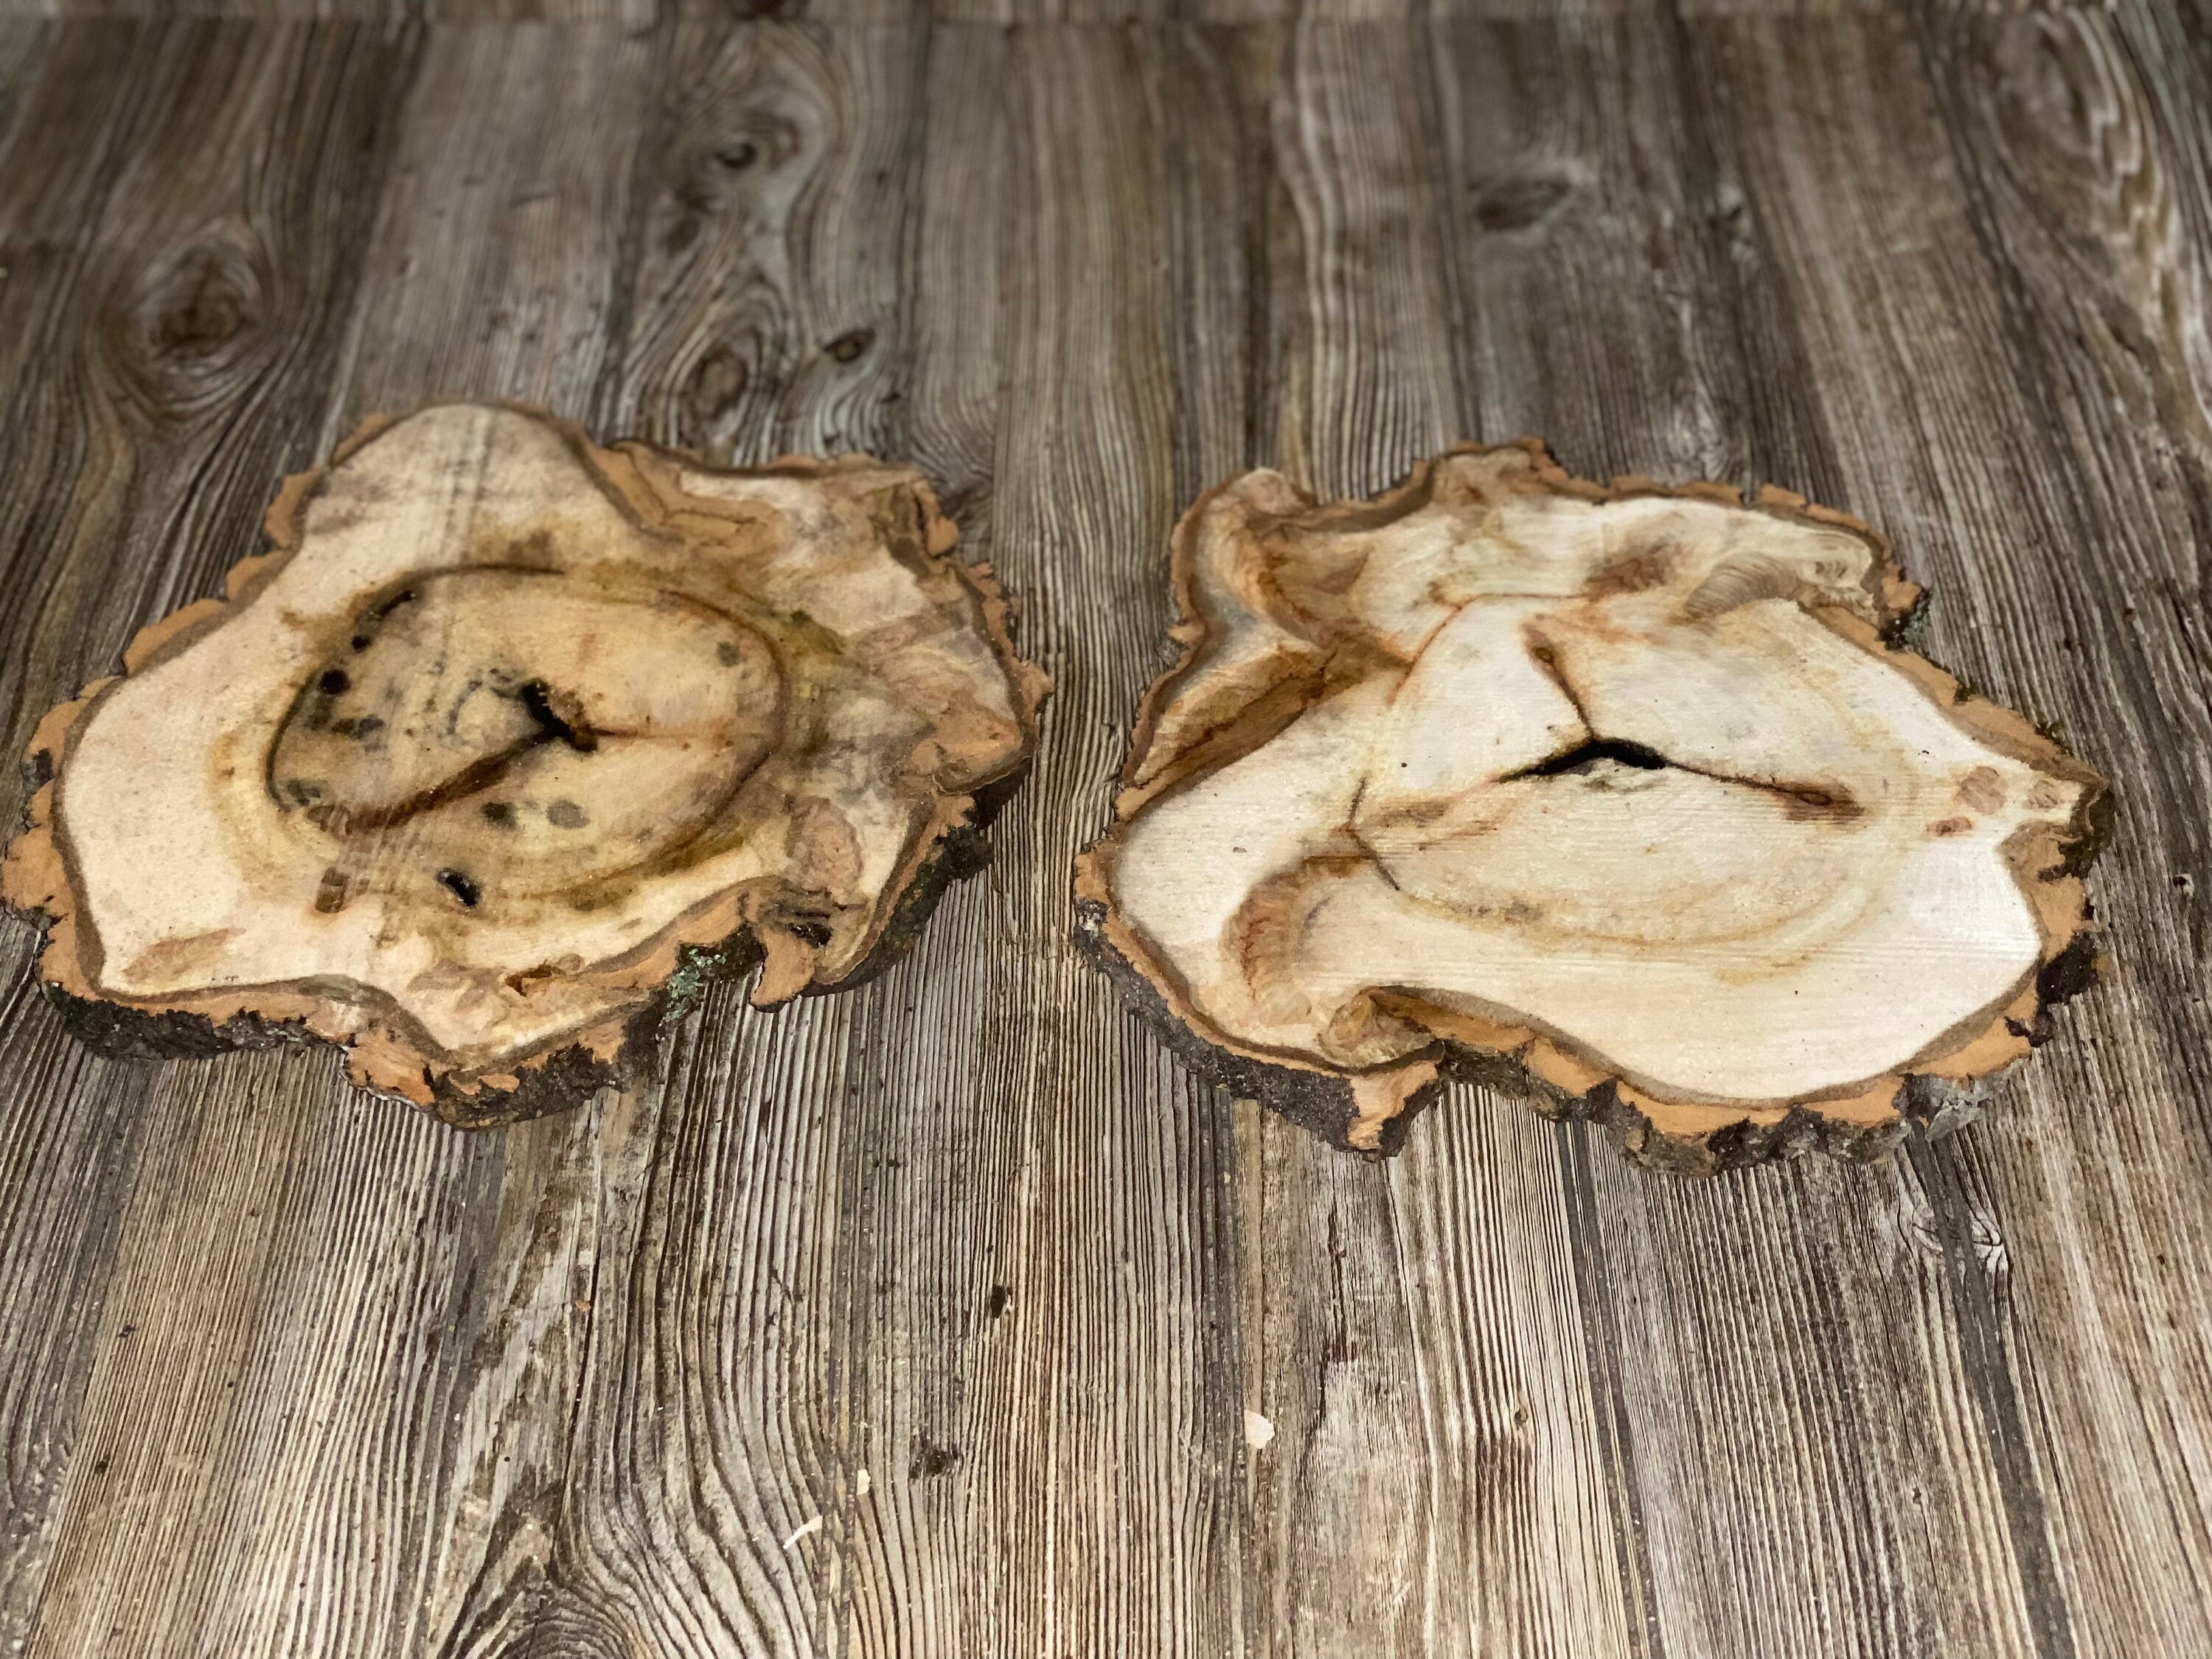 Two Aspen Burl Slices, Approximately 12.5-13 Inches Long by 12-12.5 Inches Wide and 3/4 Inches Thick